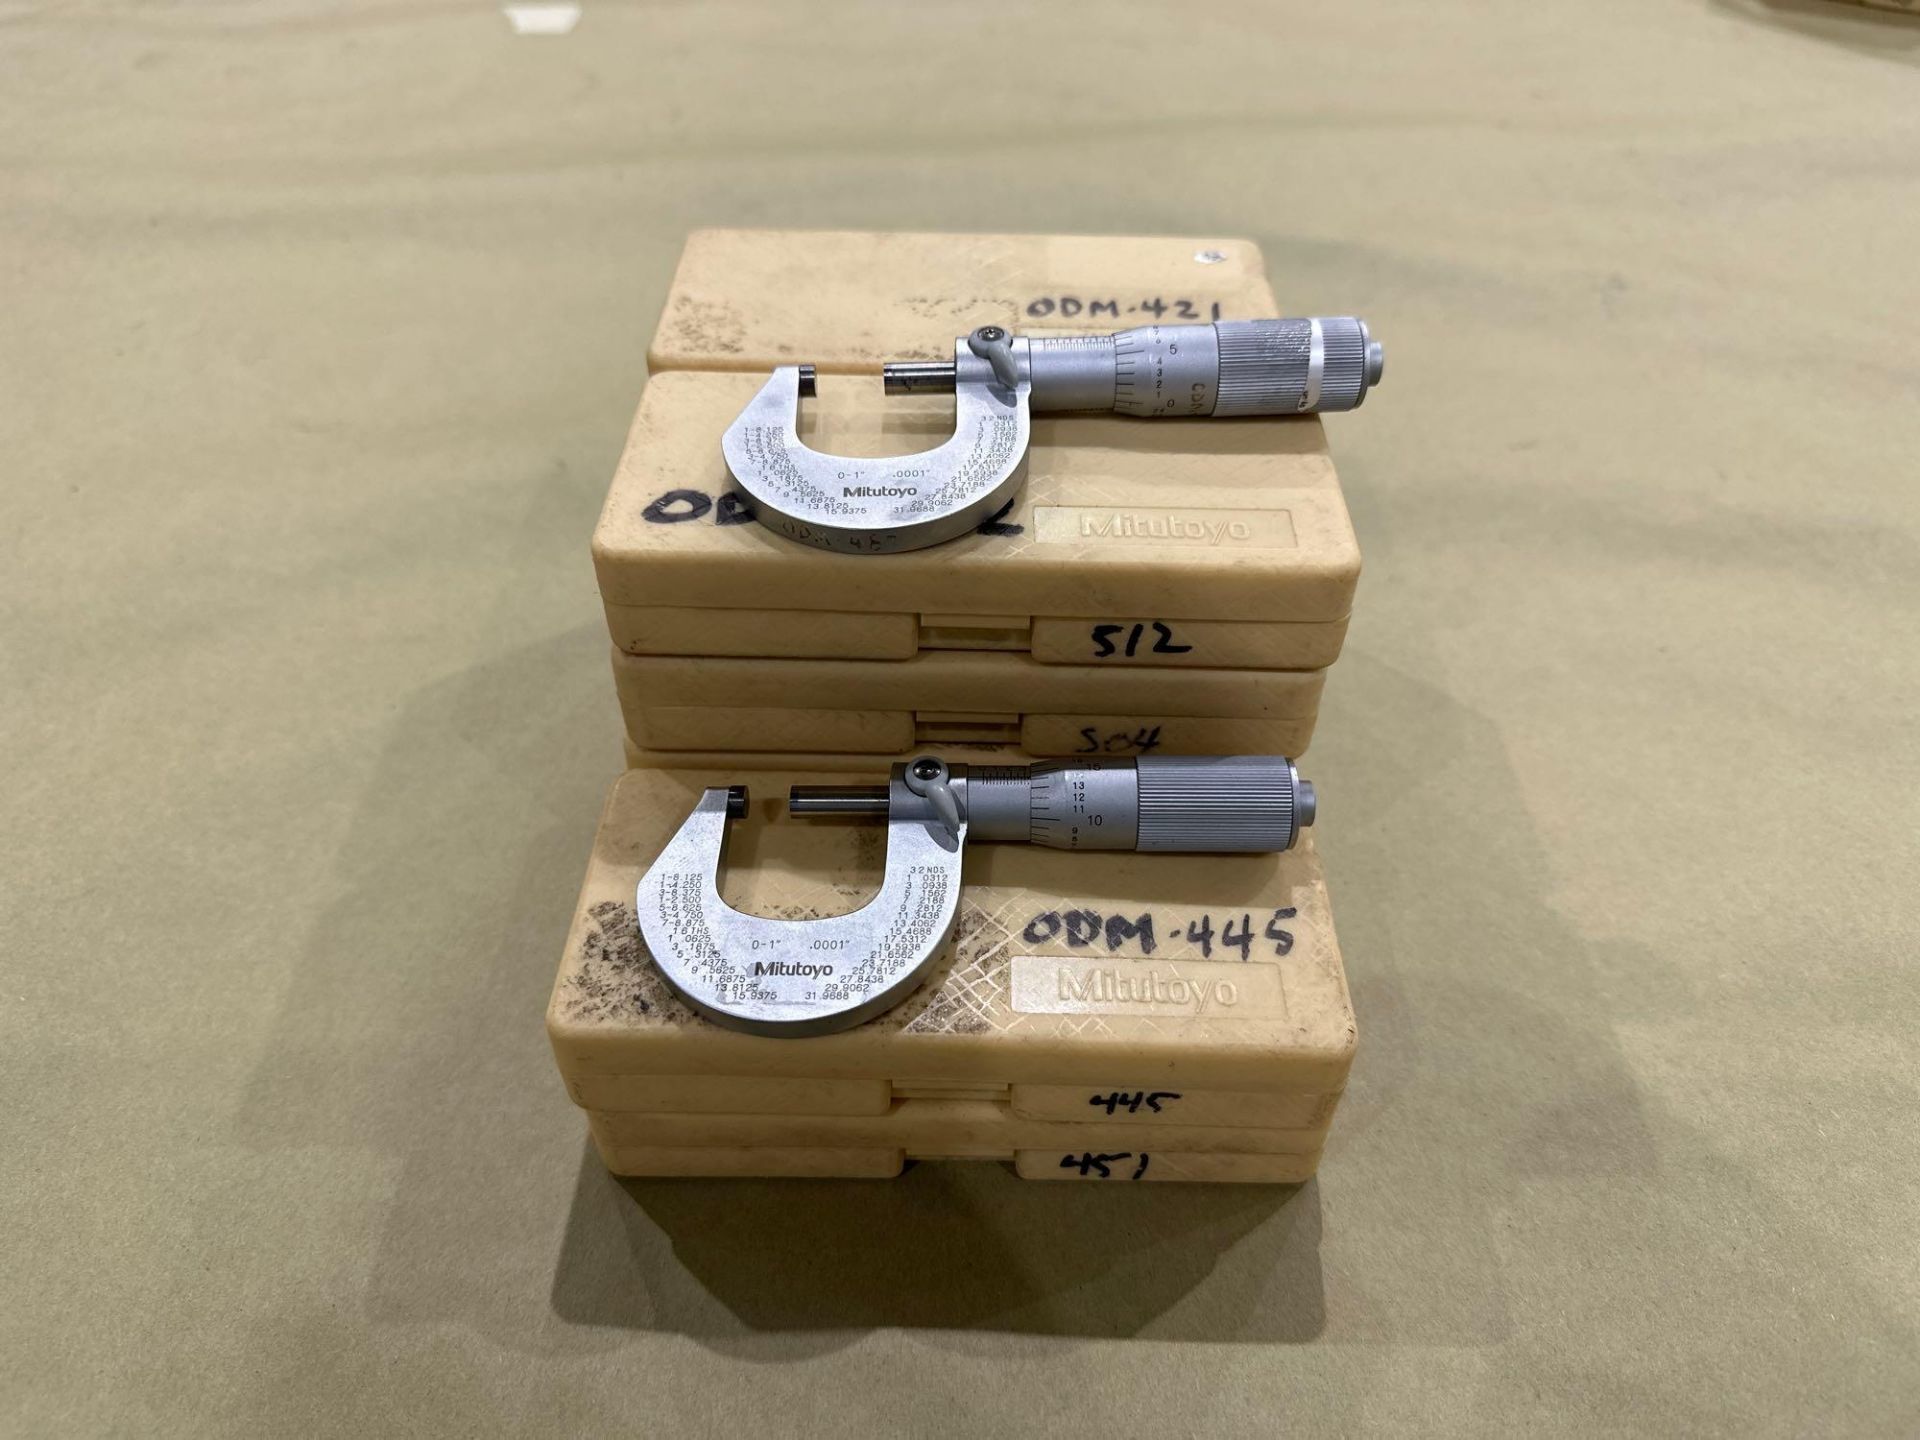 Lot of 12: Mitutoyo Mechanical OD Micrometer M225-1”, 0-1” Range, .0001” Graduation in plastic boxes - Image 2 of 7